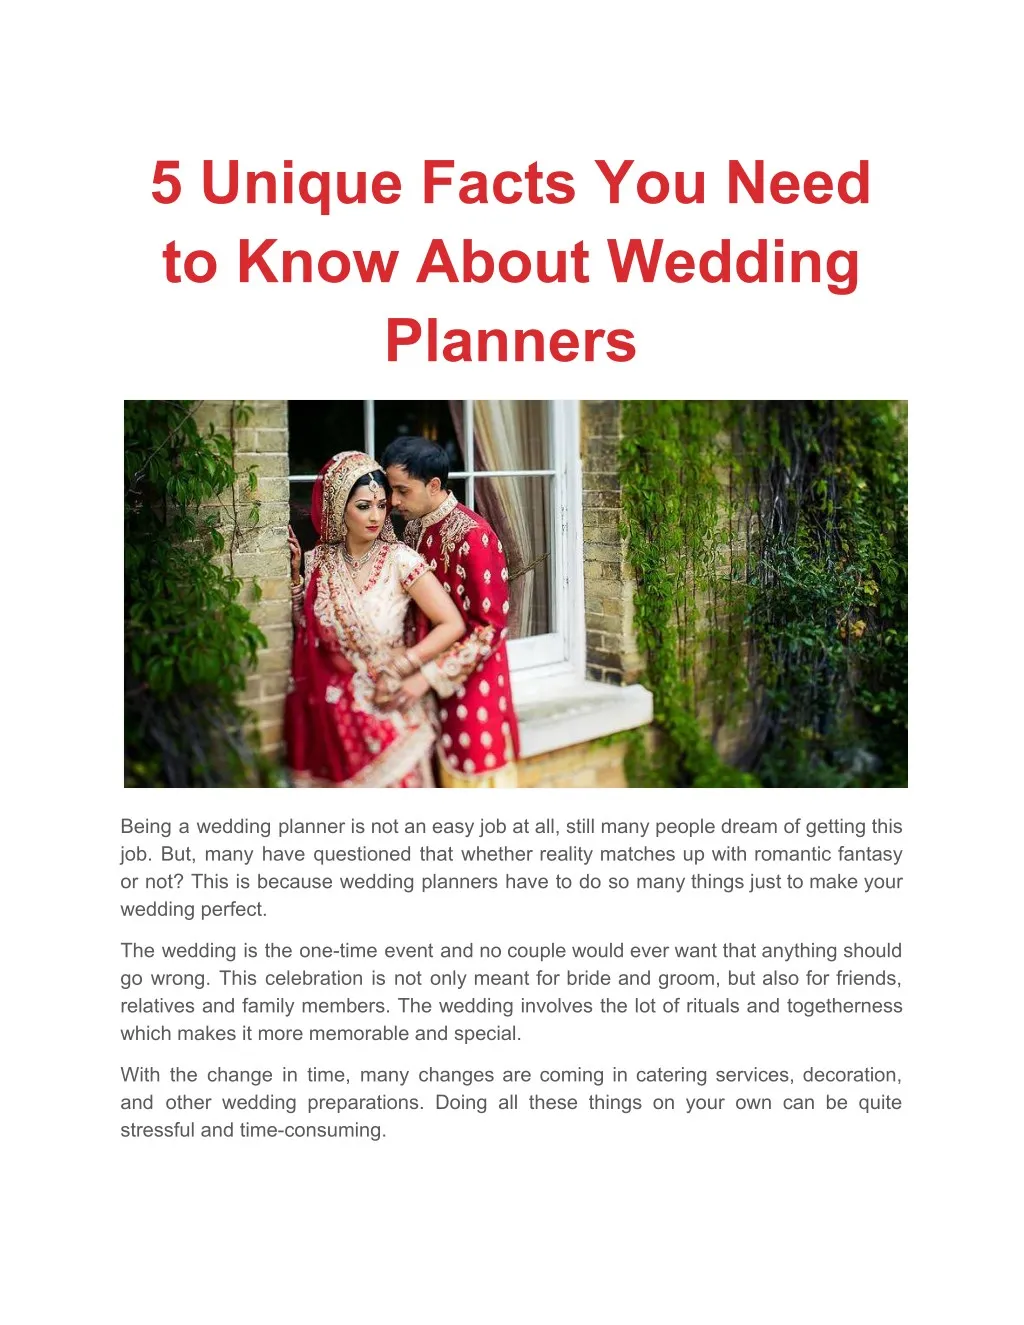 5 unique facts you need to know about wedding